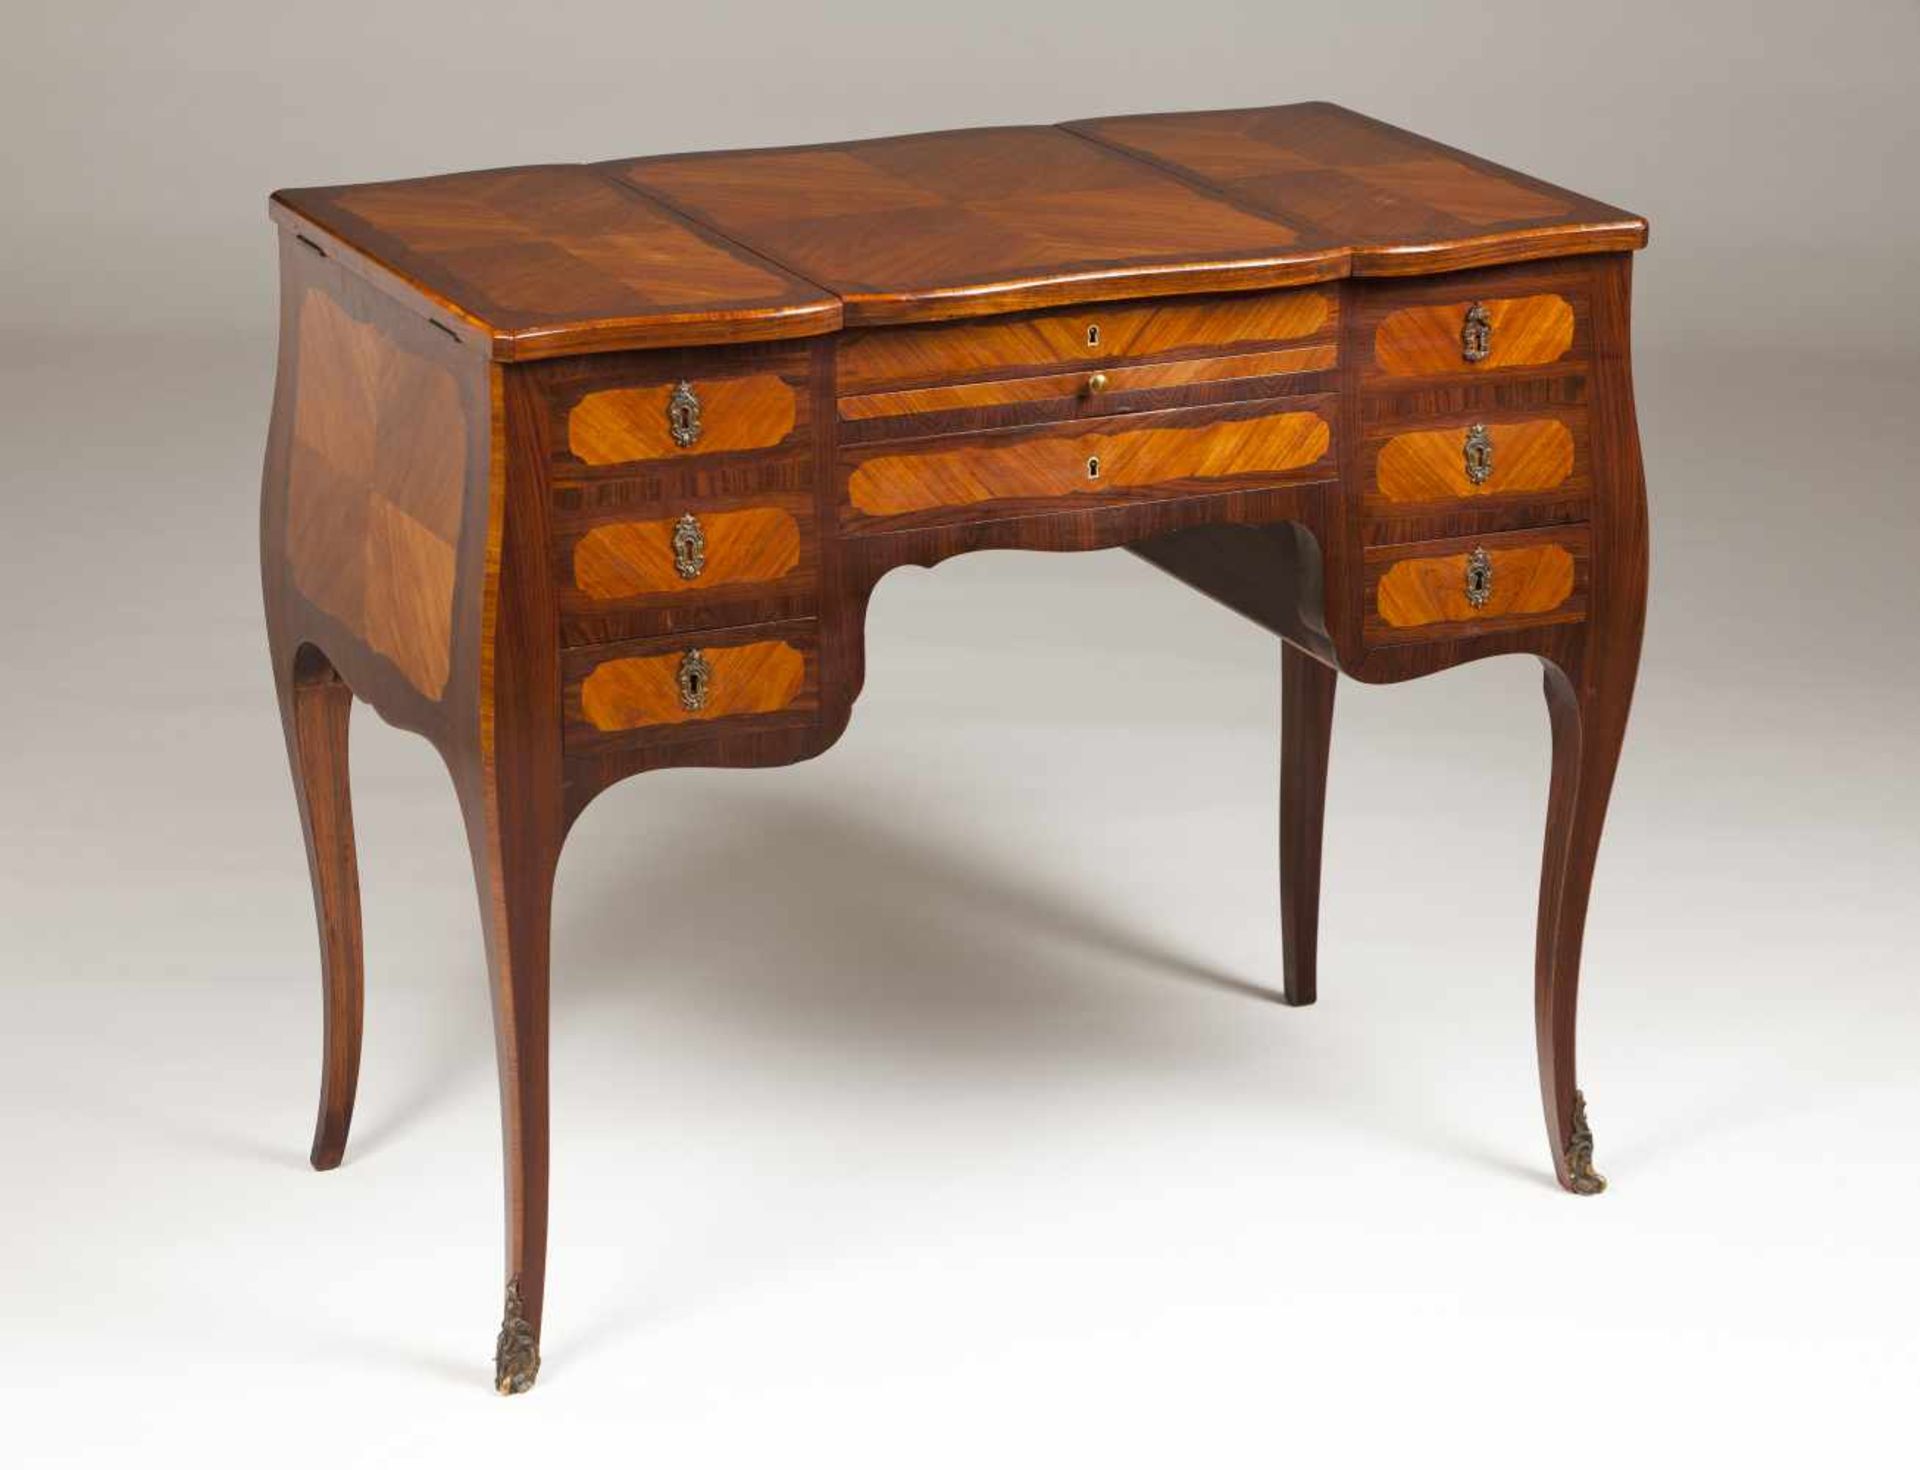 A D.José style dressing table< - Image 2 of 2